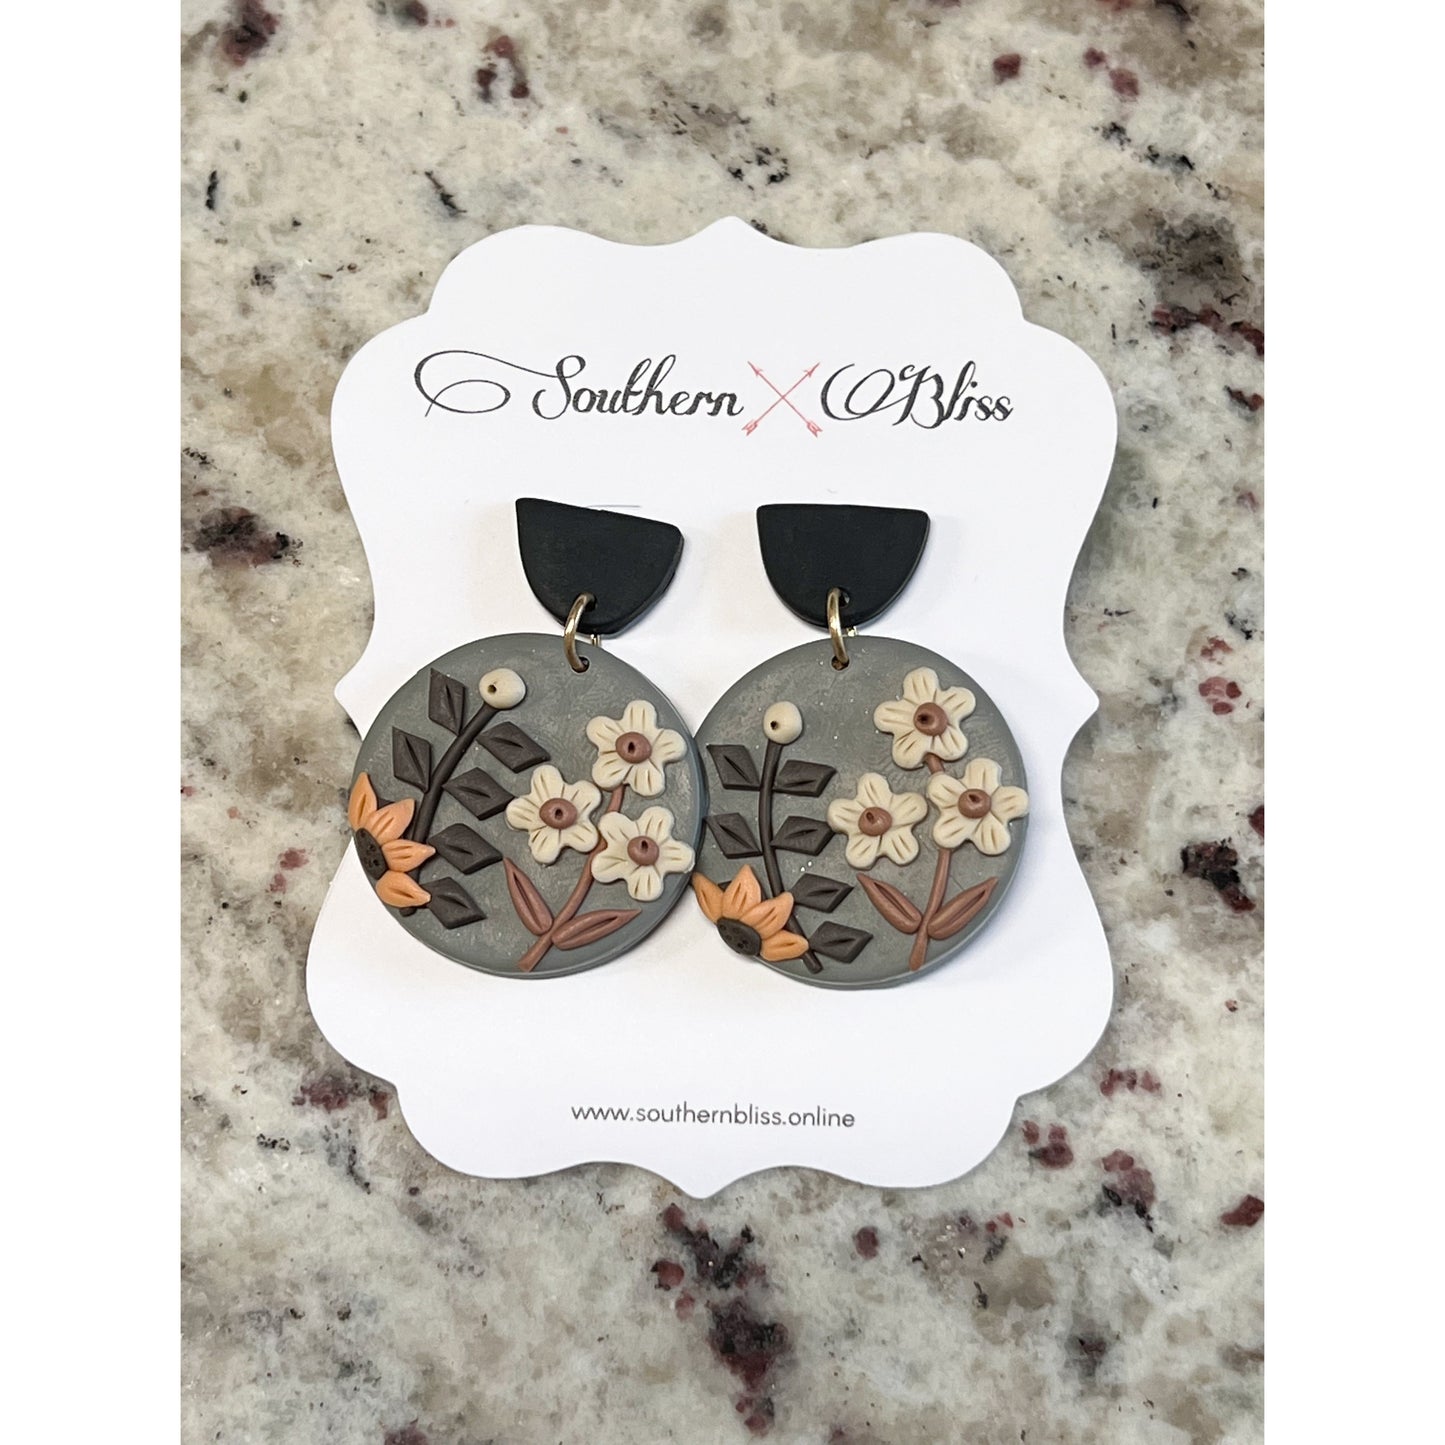 Clay Floral Circle Earrings